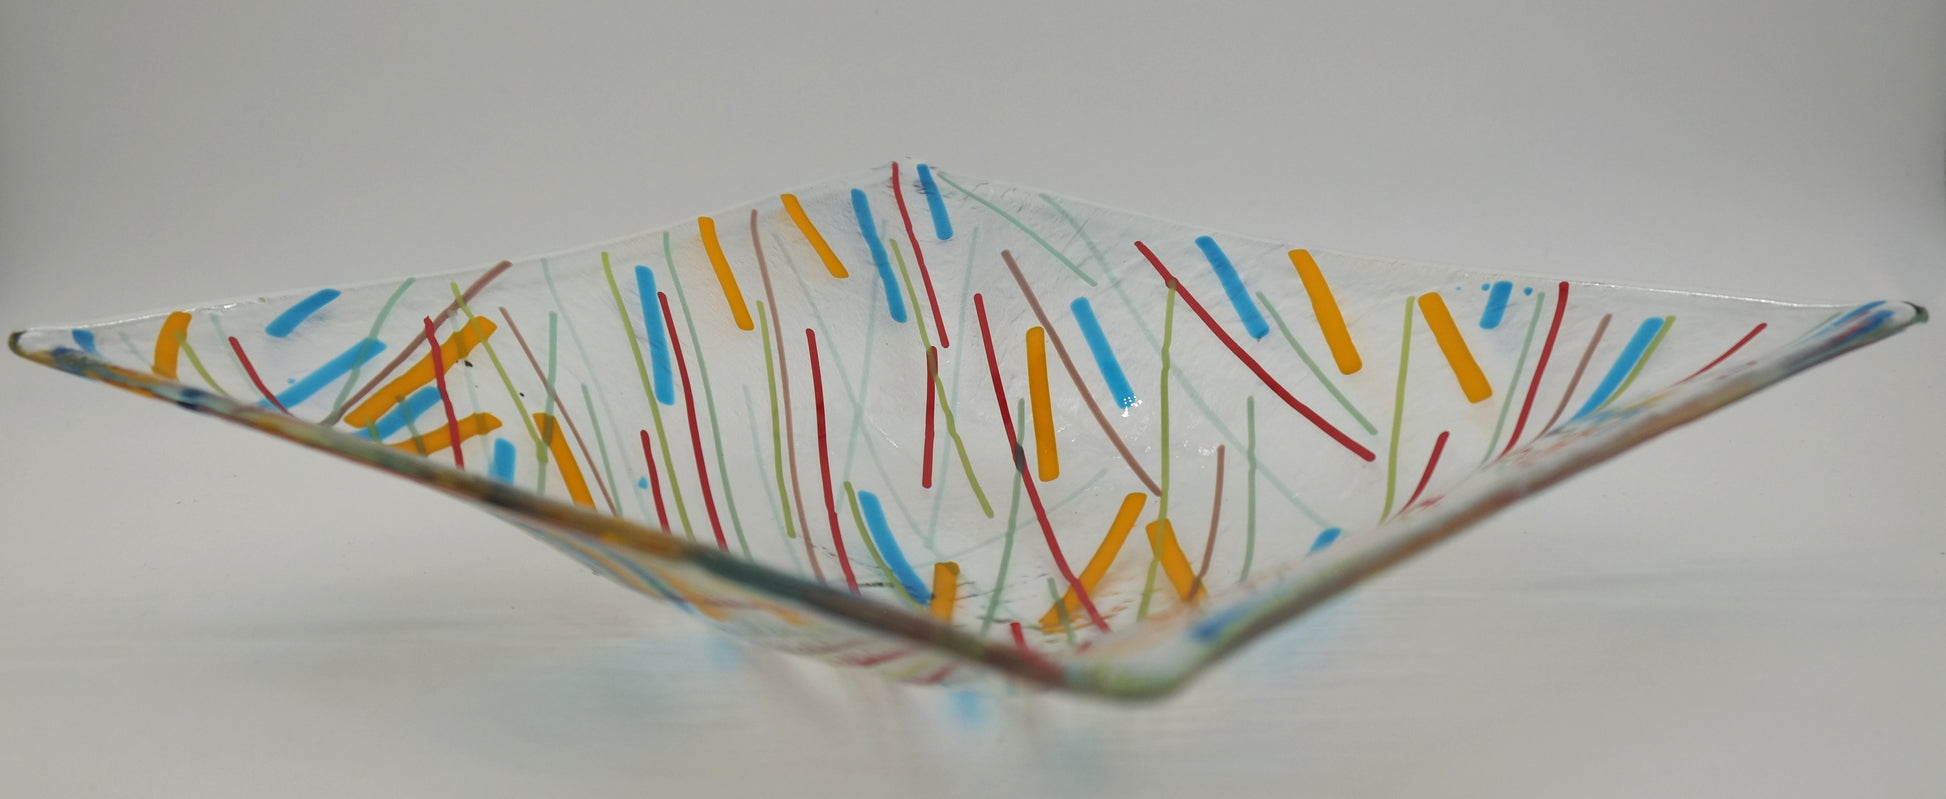 Side view of a Fused glass square bowl. Bowl is a made of a clear piece of glass with lines radiating from the lower left corner outward. The colors of the lines are red, green, faint blue, with thicker lines of orange and light blue.